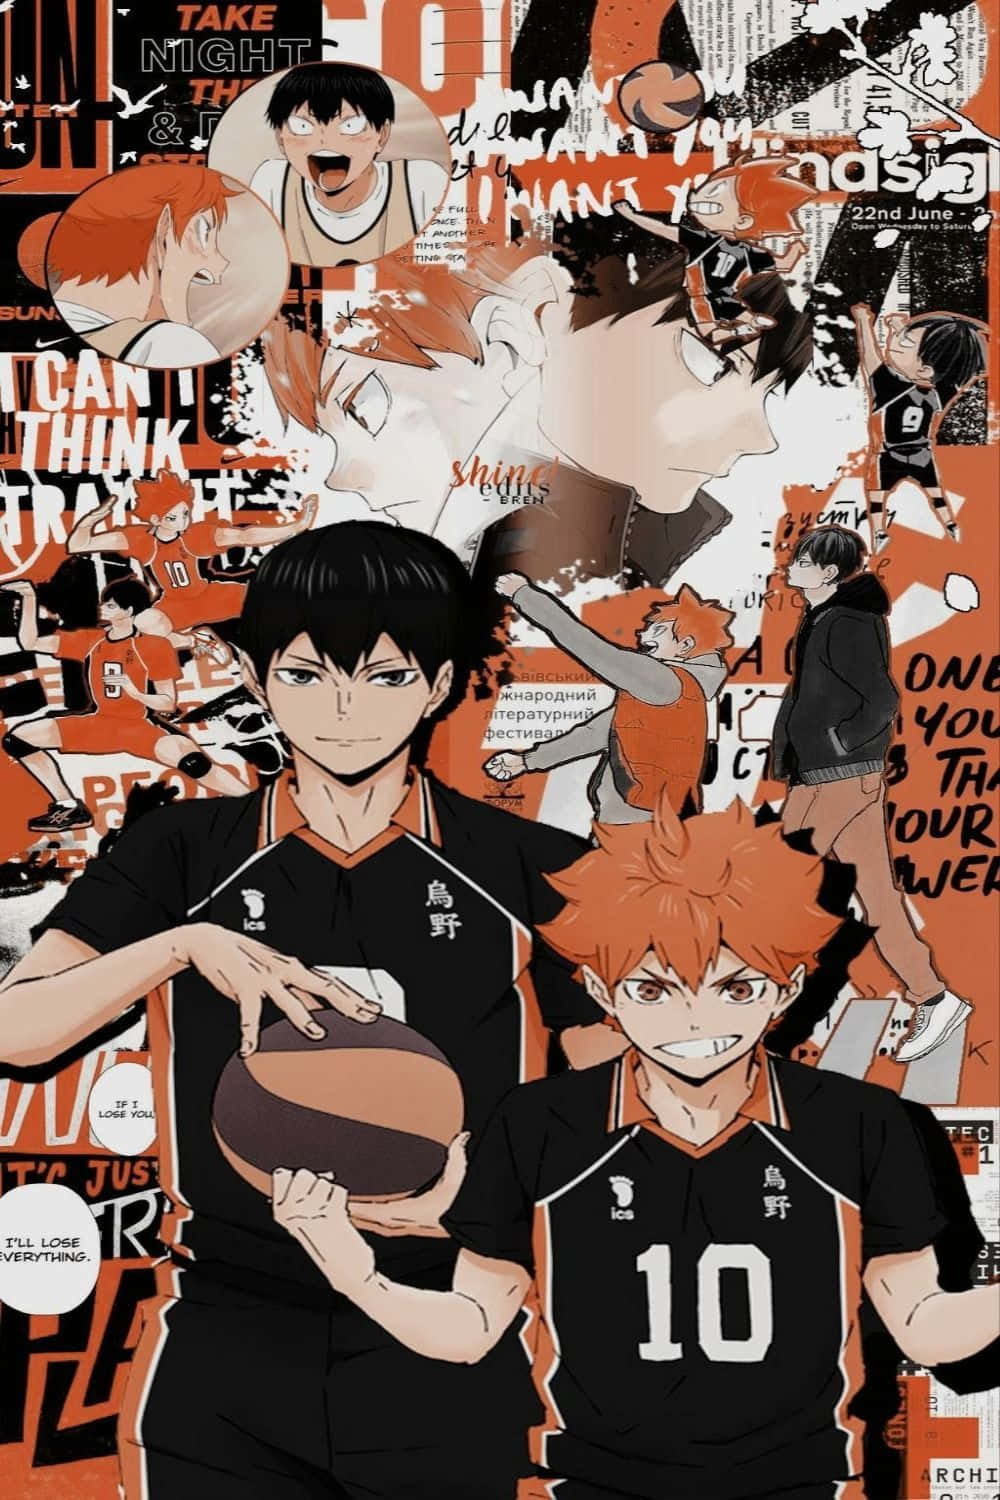 Truer words have never been spoken for Haikyuu Anime fans—“Iphone's the way to go!” Wallpaper